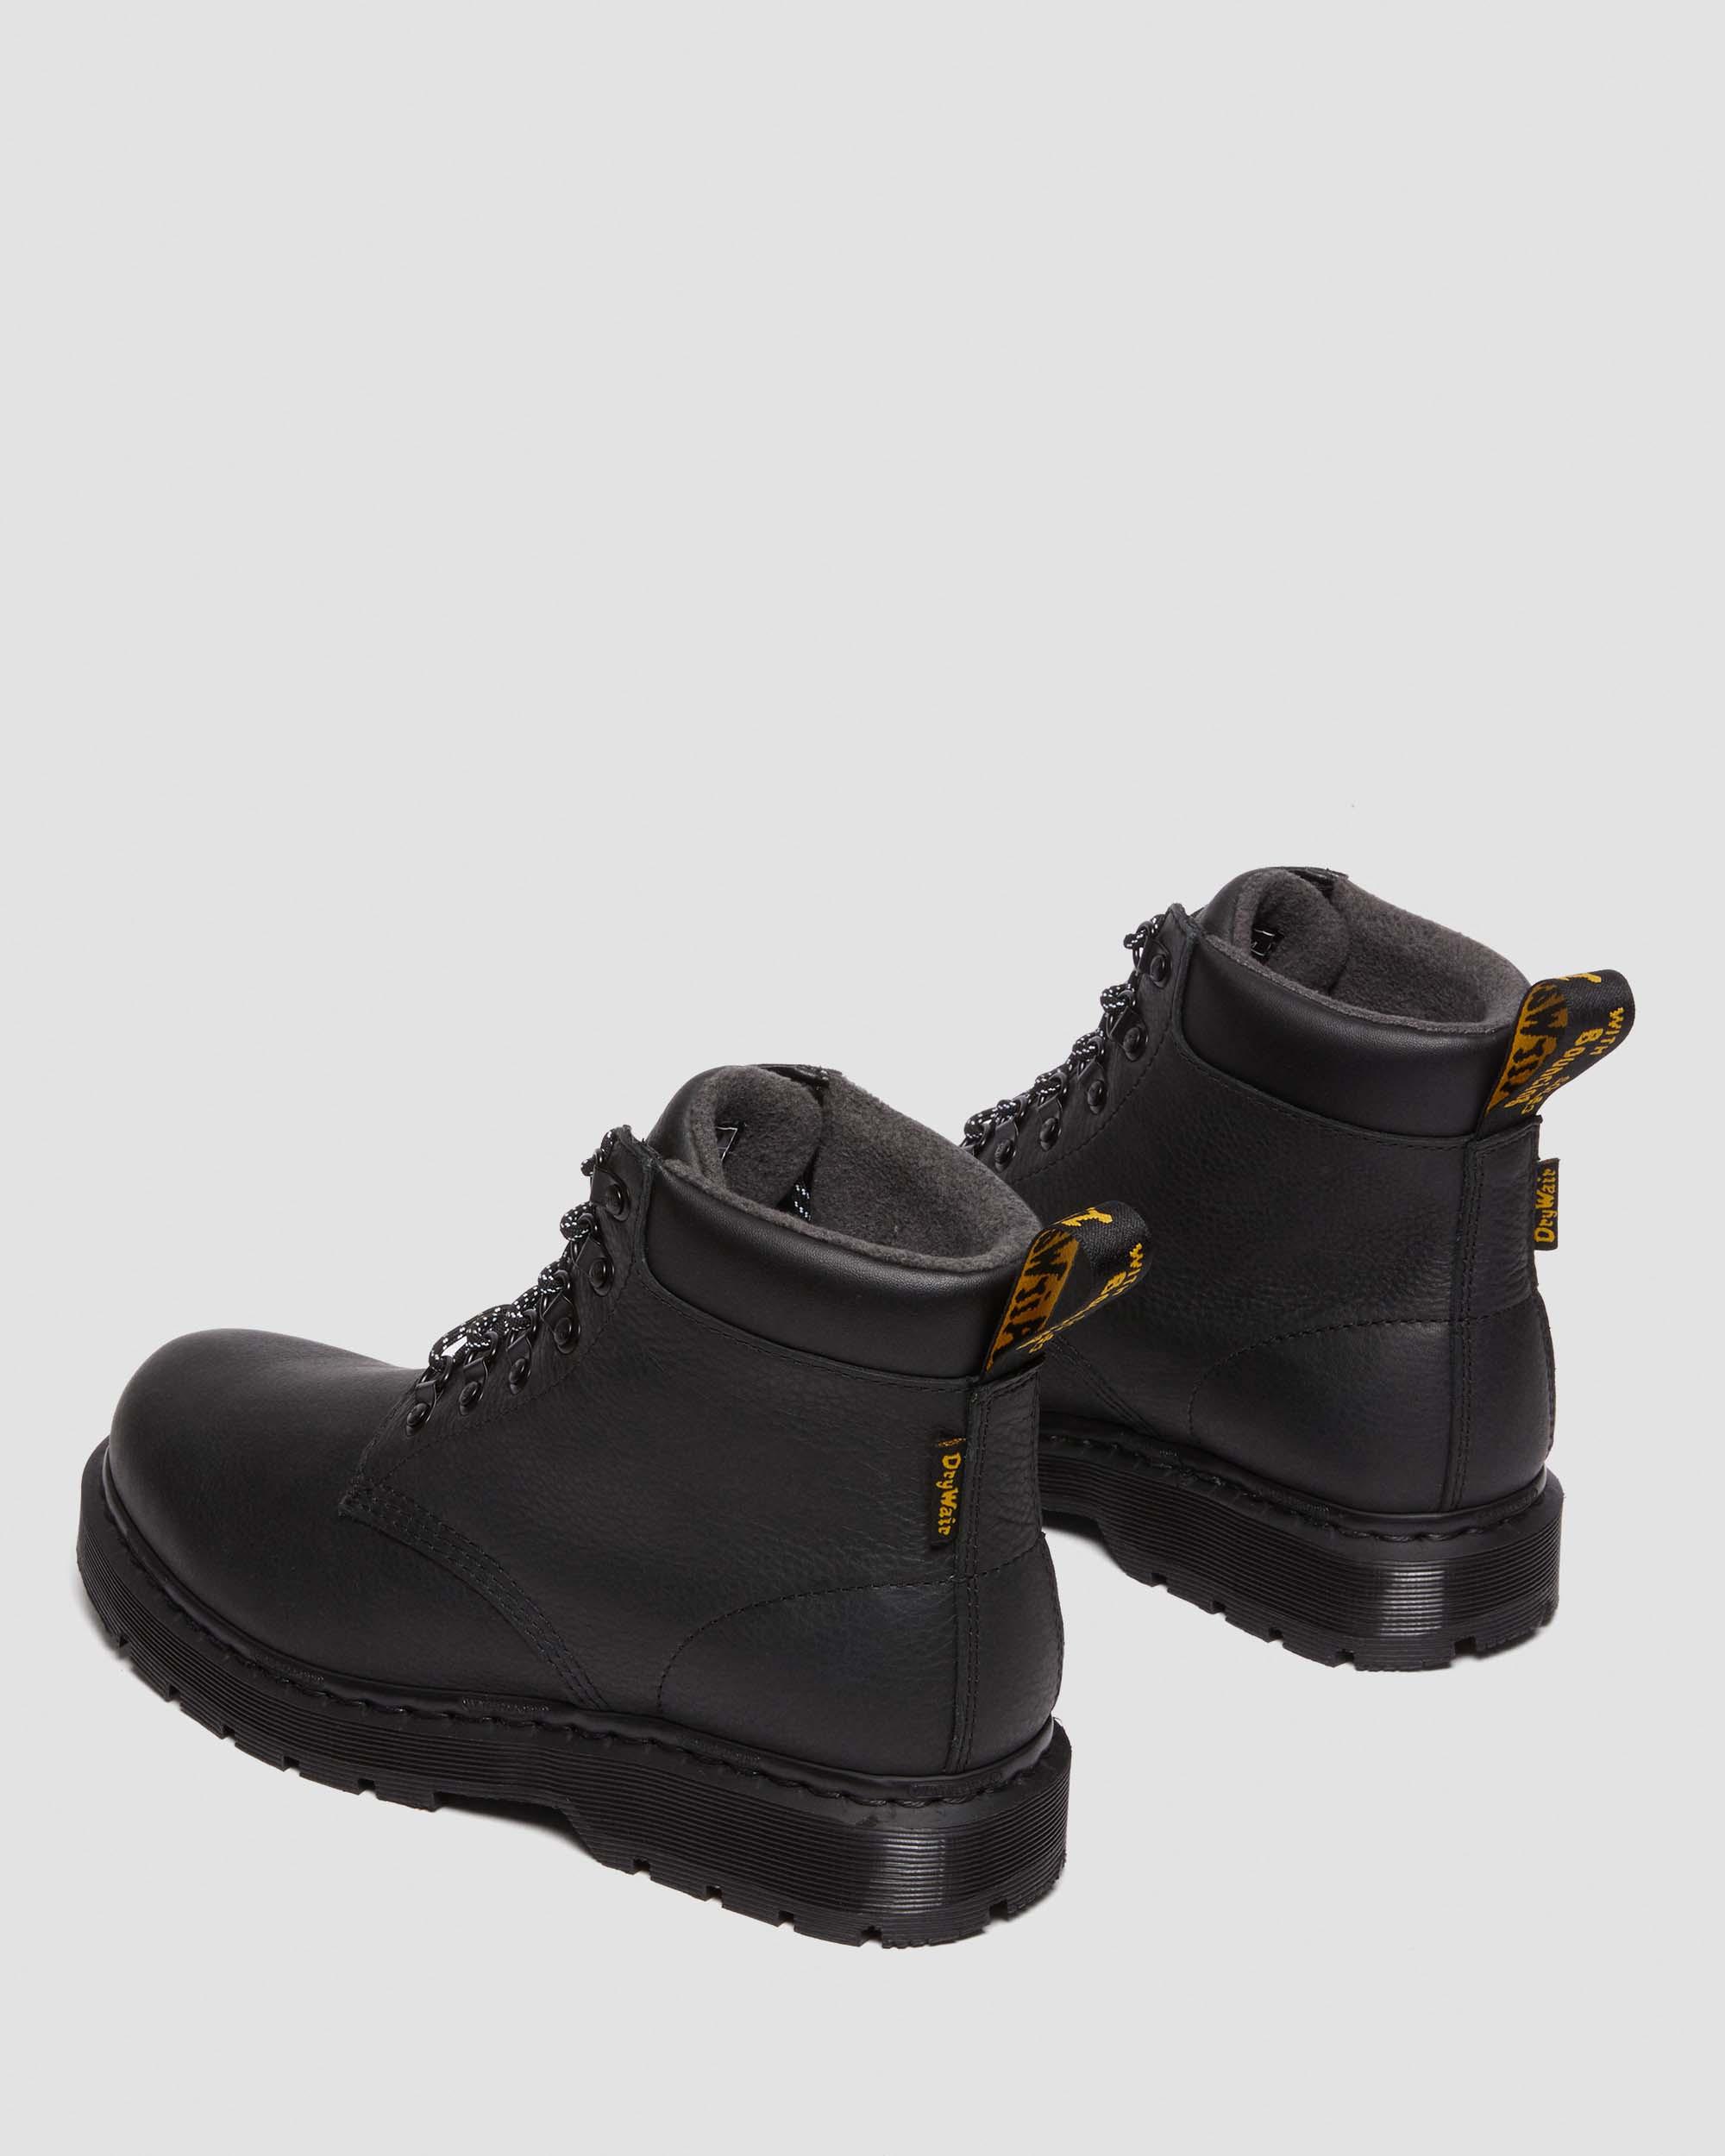 939 Padded Collar Ankle Boots in Black | Dr. Martens